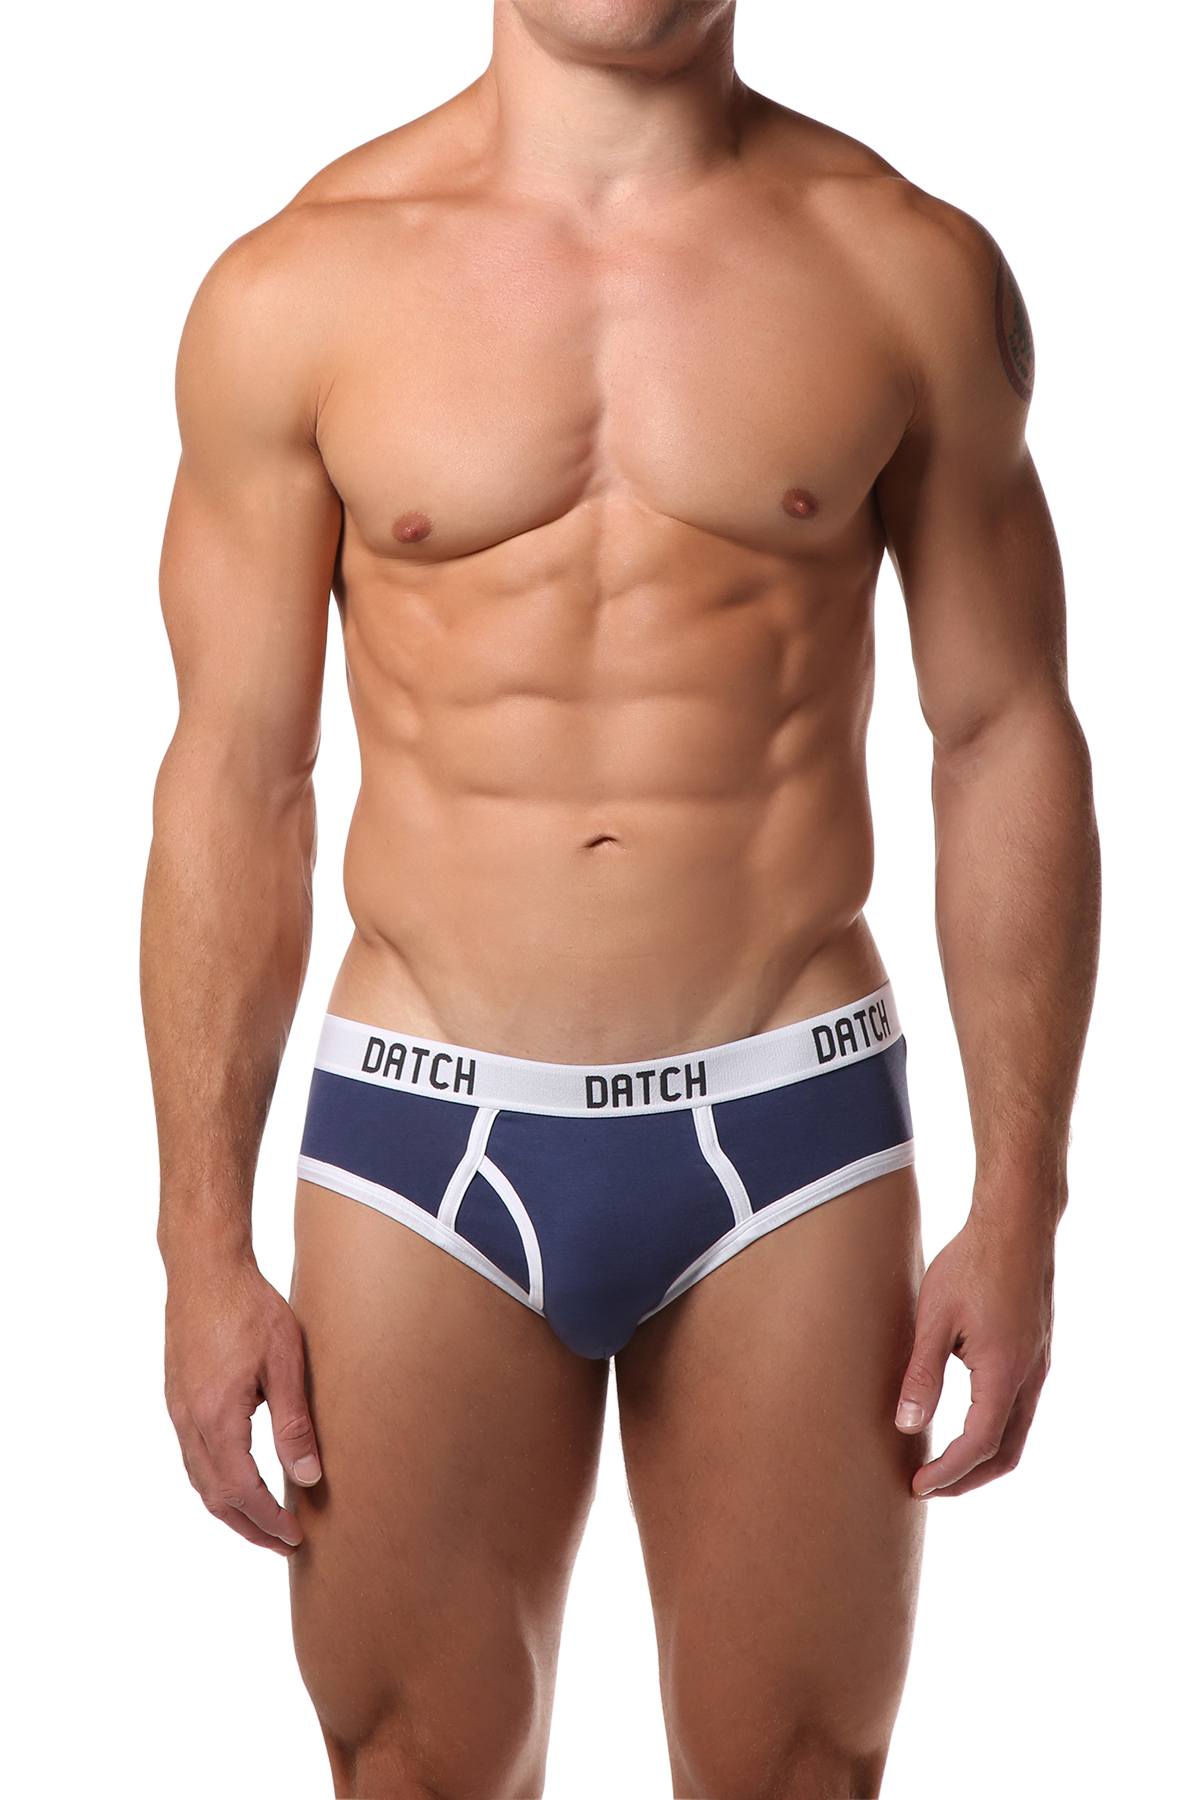 Datch Blue Contrast Brief